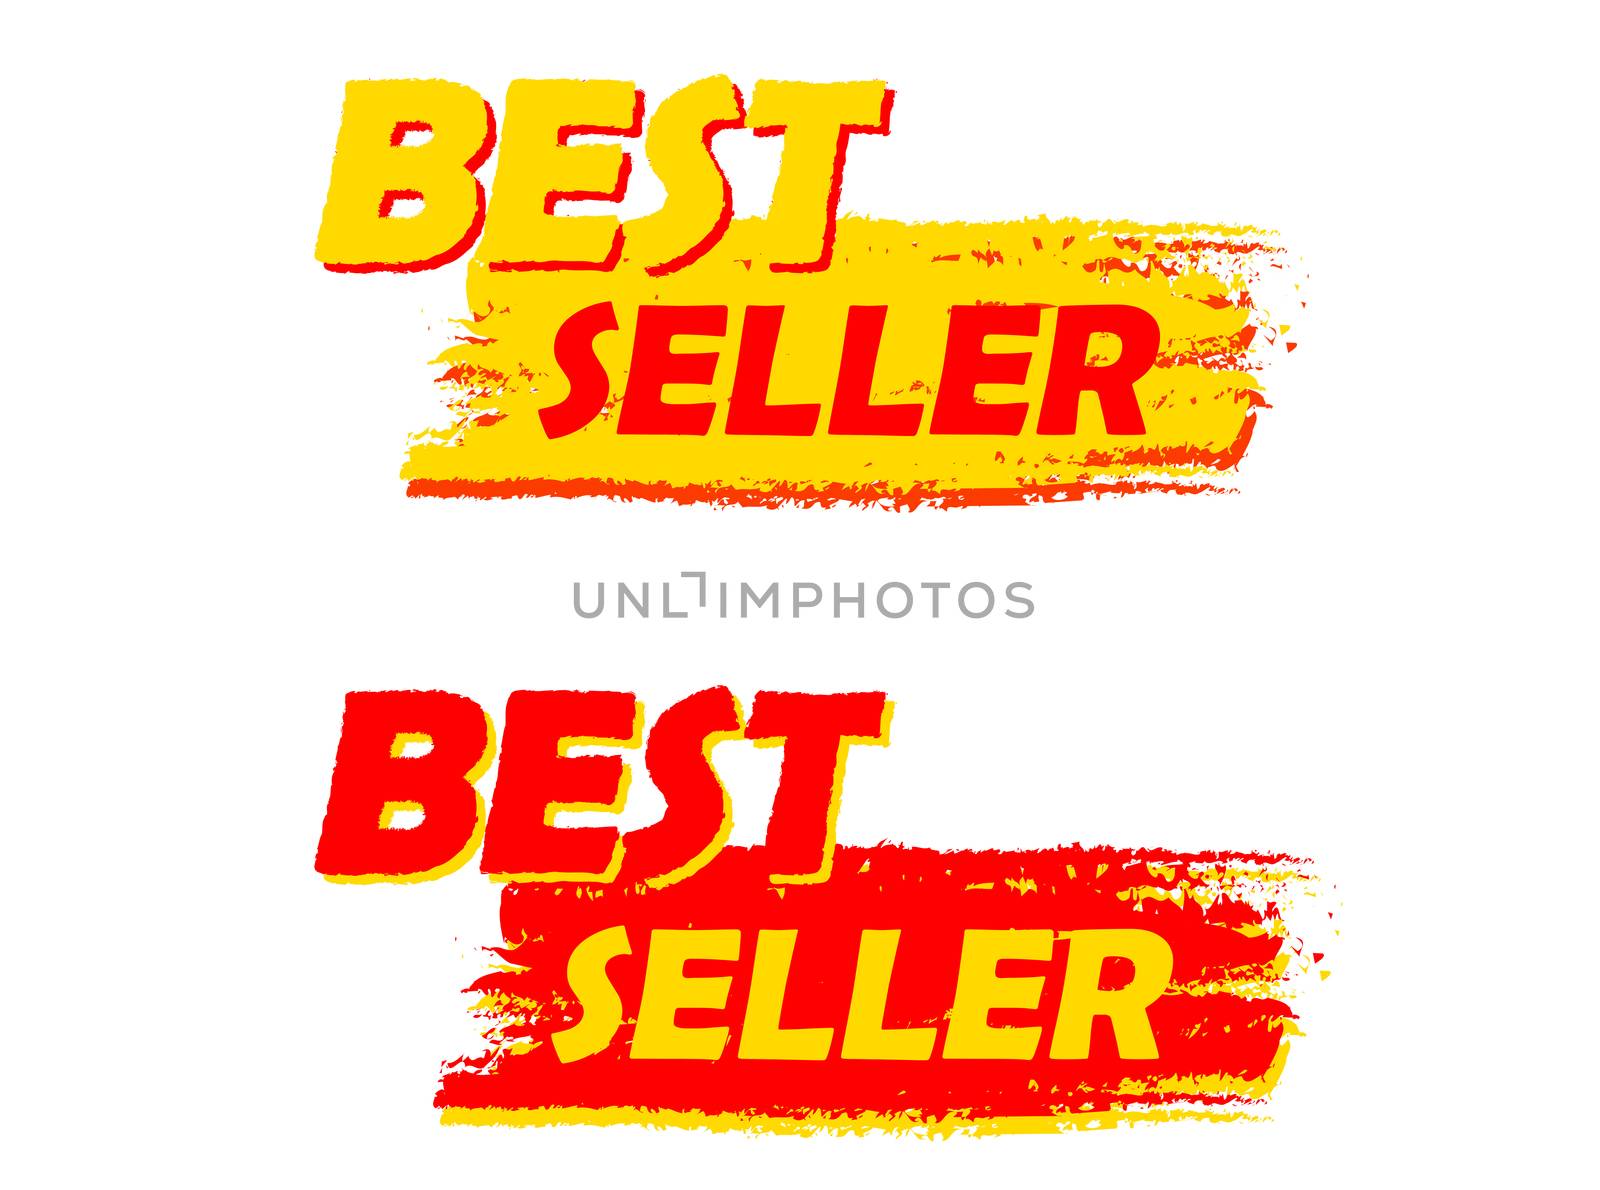 best seller banners - text in yellow and red drawn labels, business shopping concept